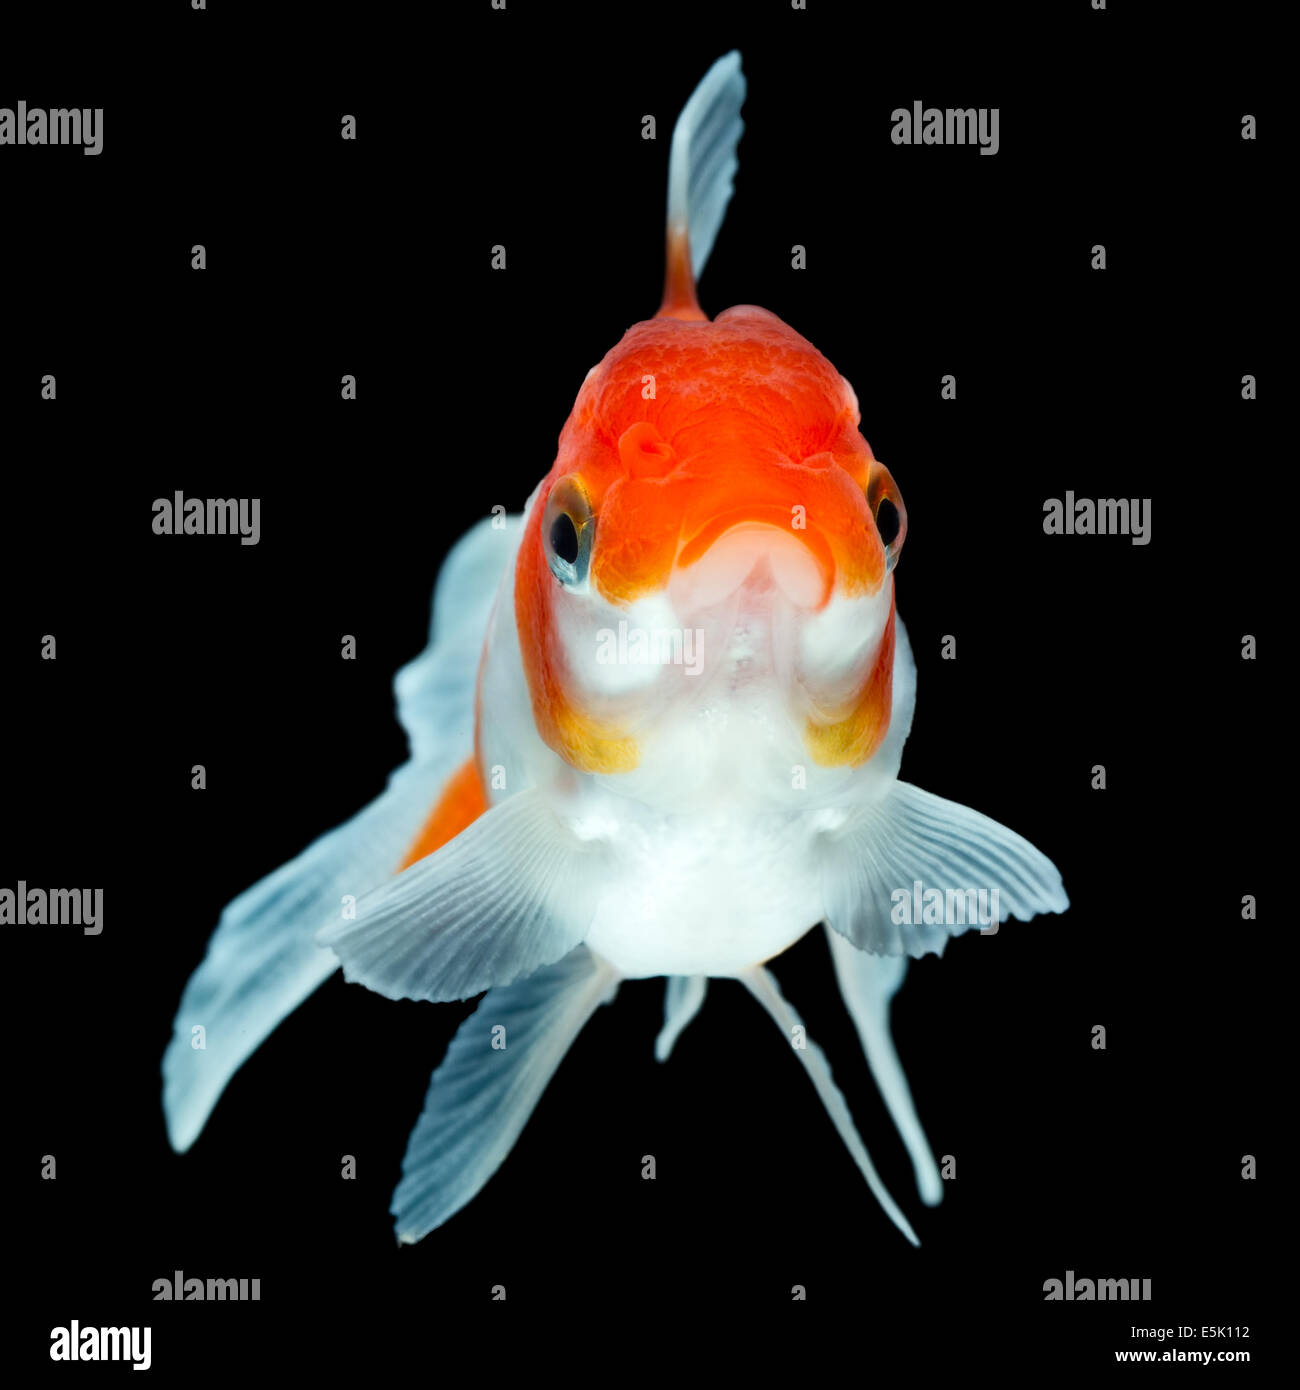 Oranda Goldfish Isolated On Black High Quality Studio Shot Manually Removed From Background So The Finnage Is Complete Stock Photo